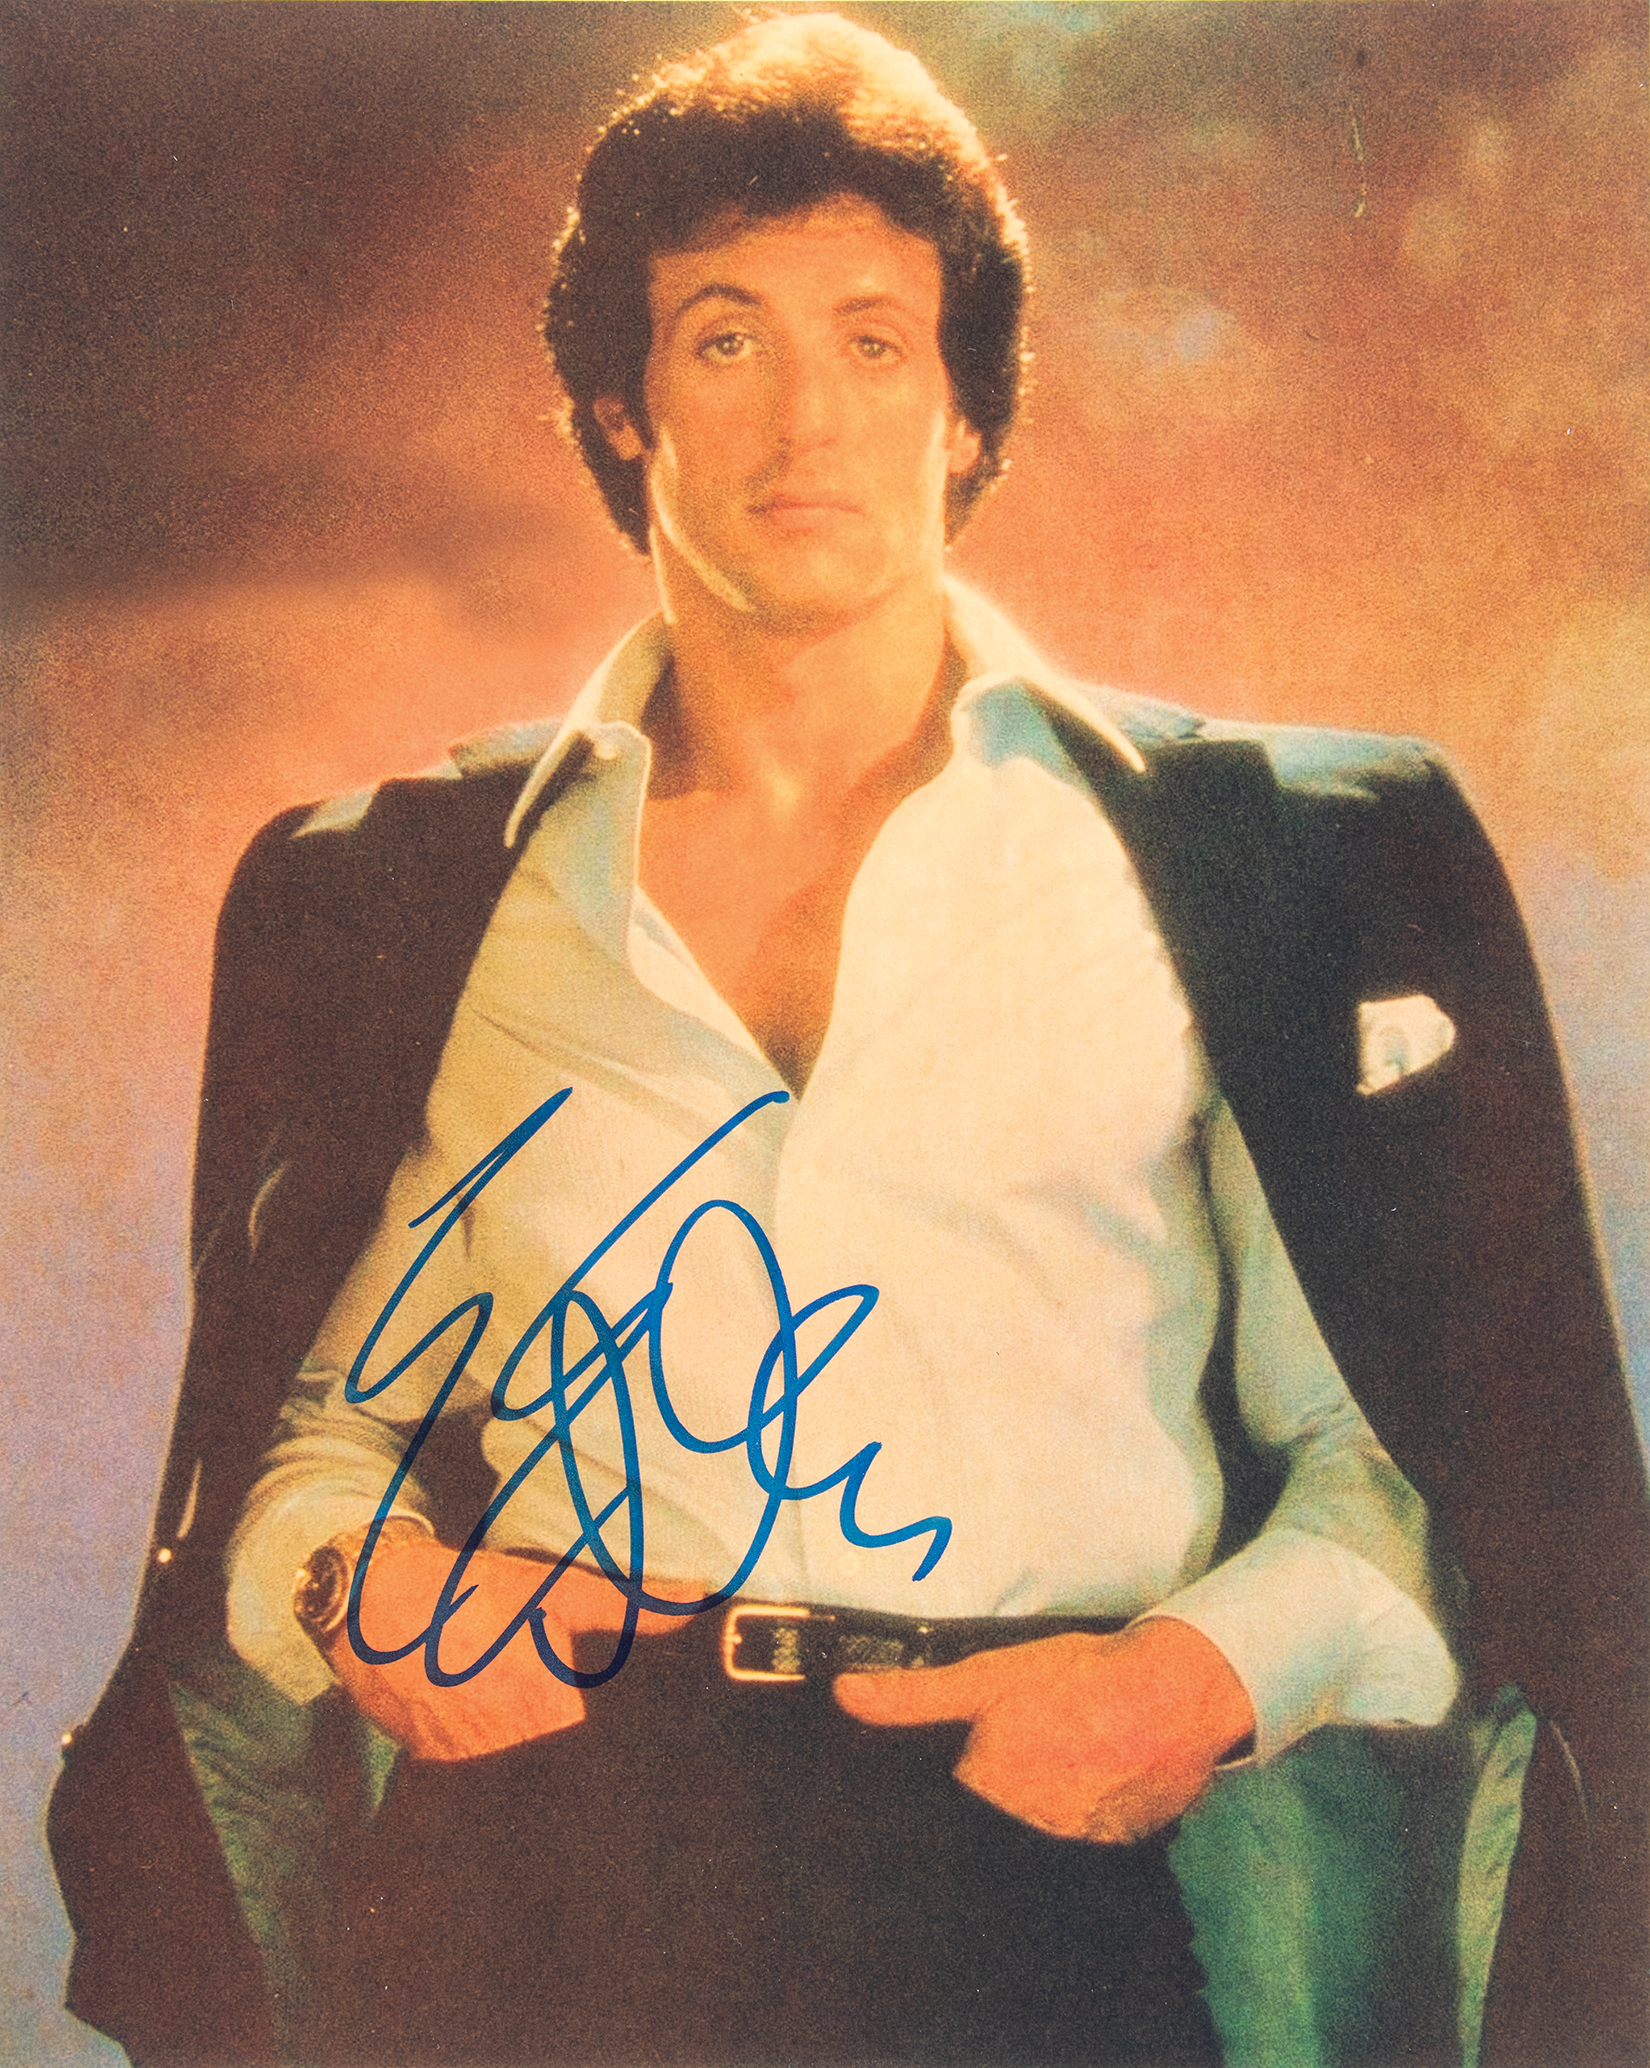 Lot #613 Sylvester Stallone Signed Photograph - Image 1